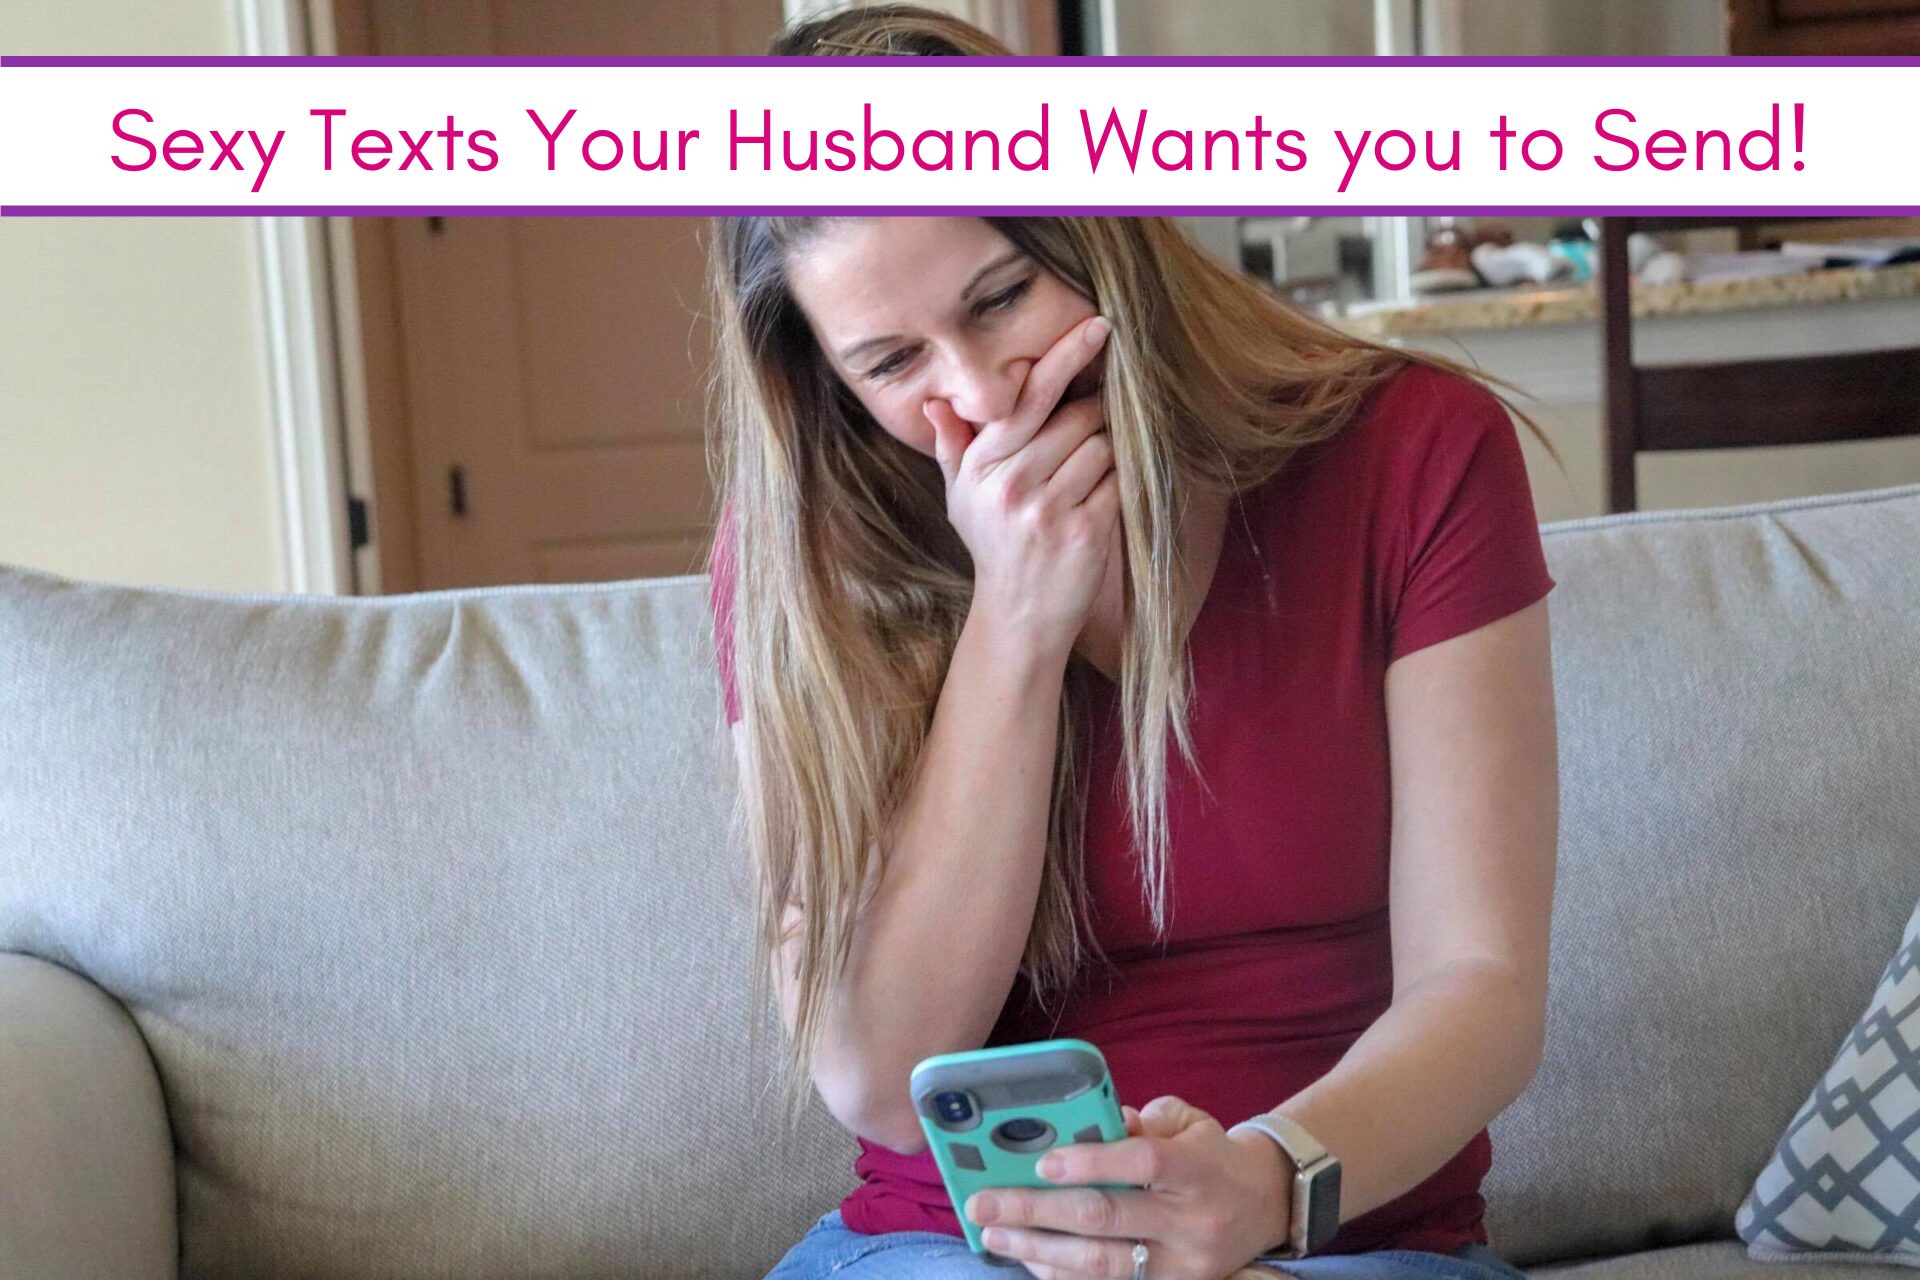 50 Sexy Texts Your Husband Wants you to Send!